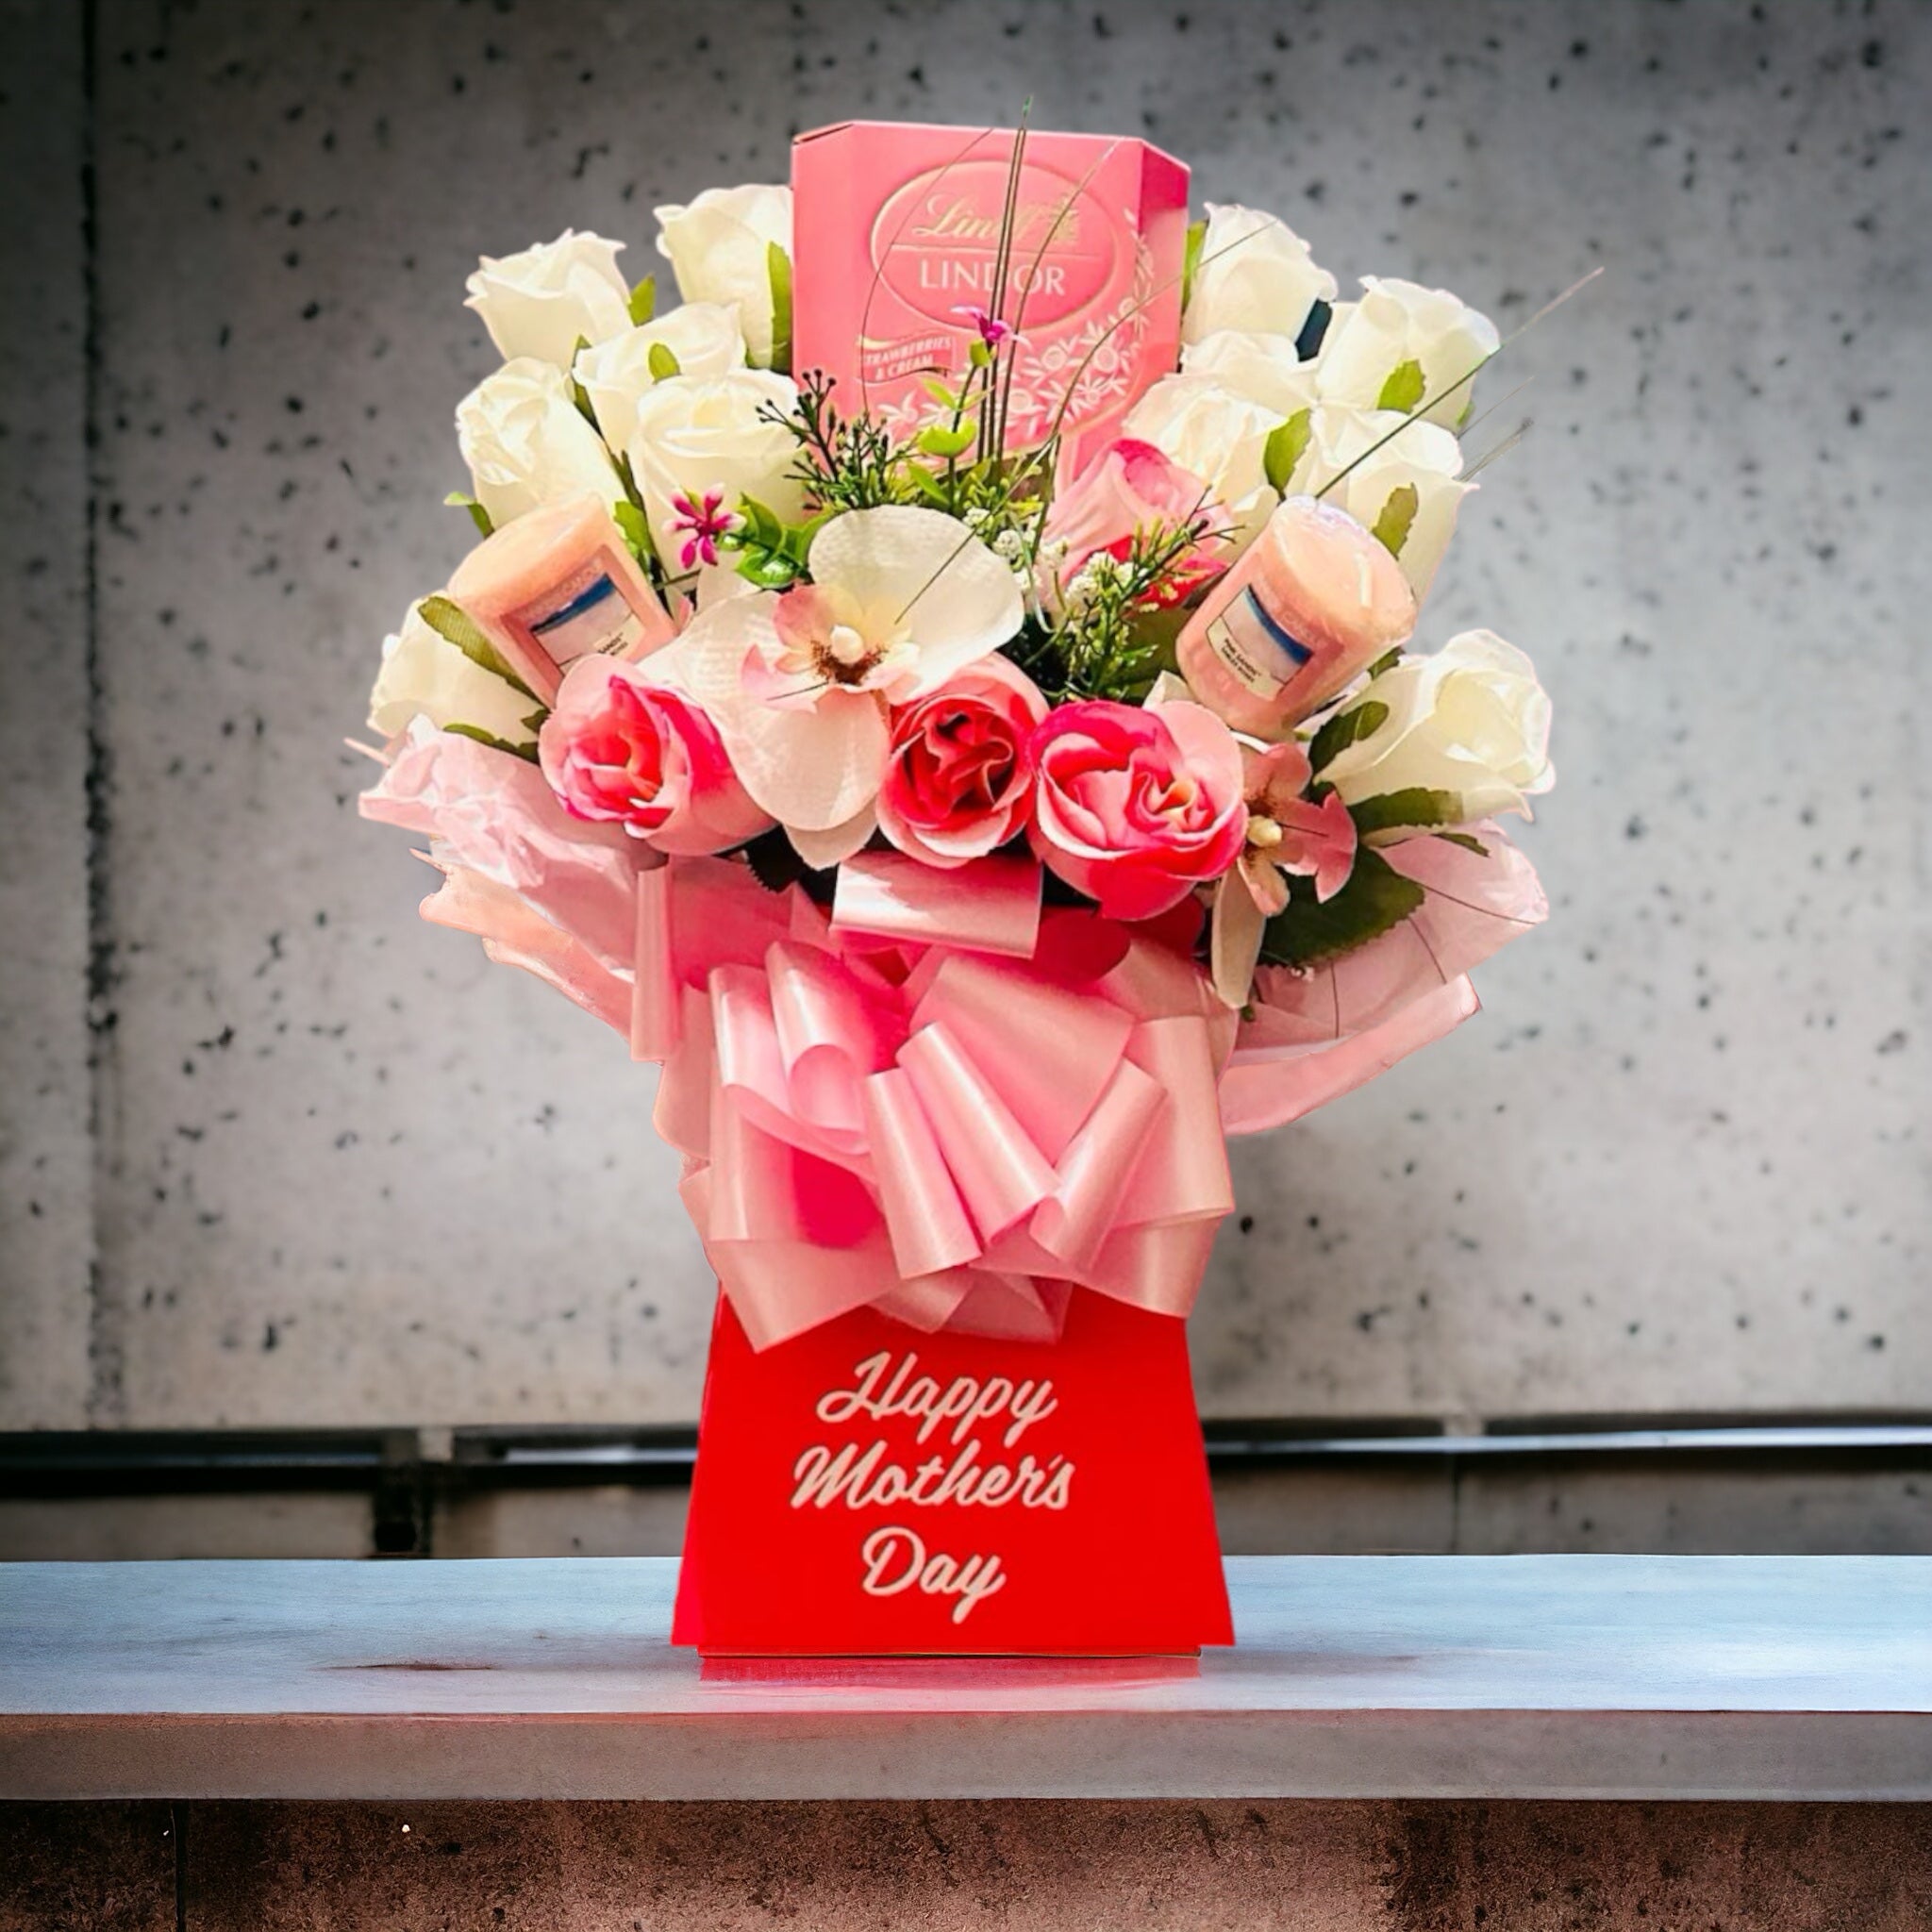 Mothers Day Pink Lindor Chocolate & Candle Bouquet